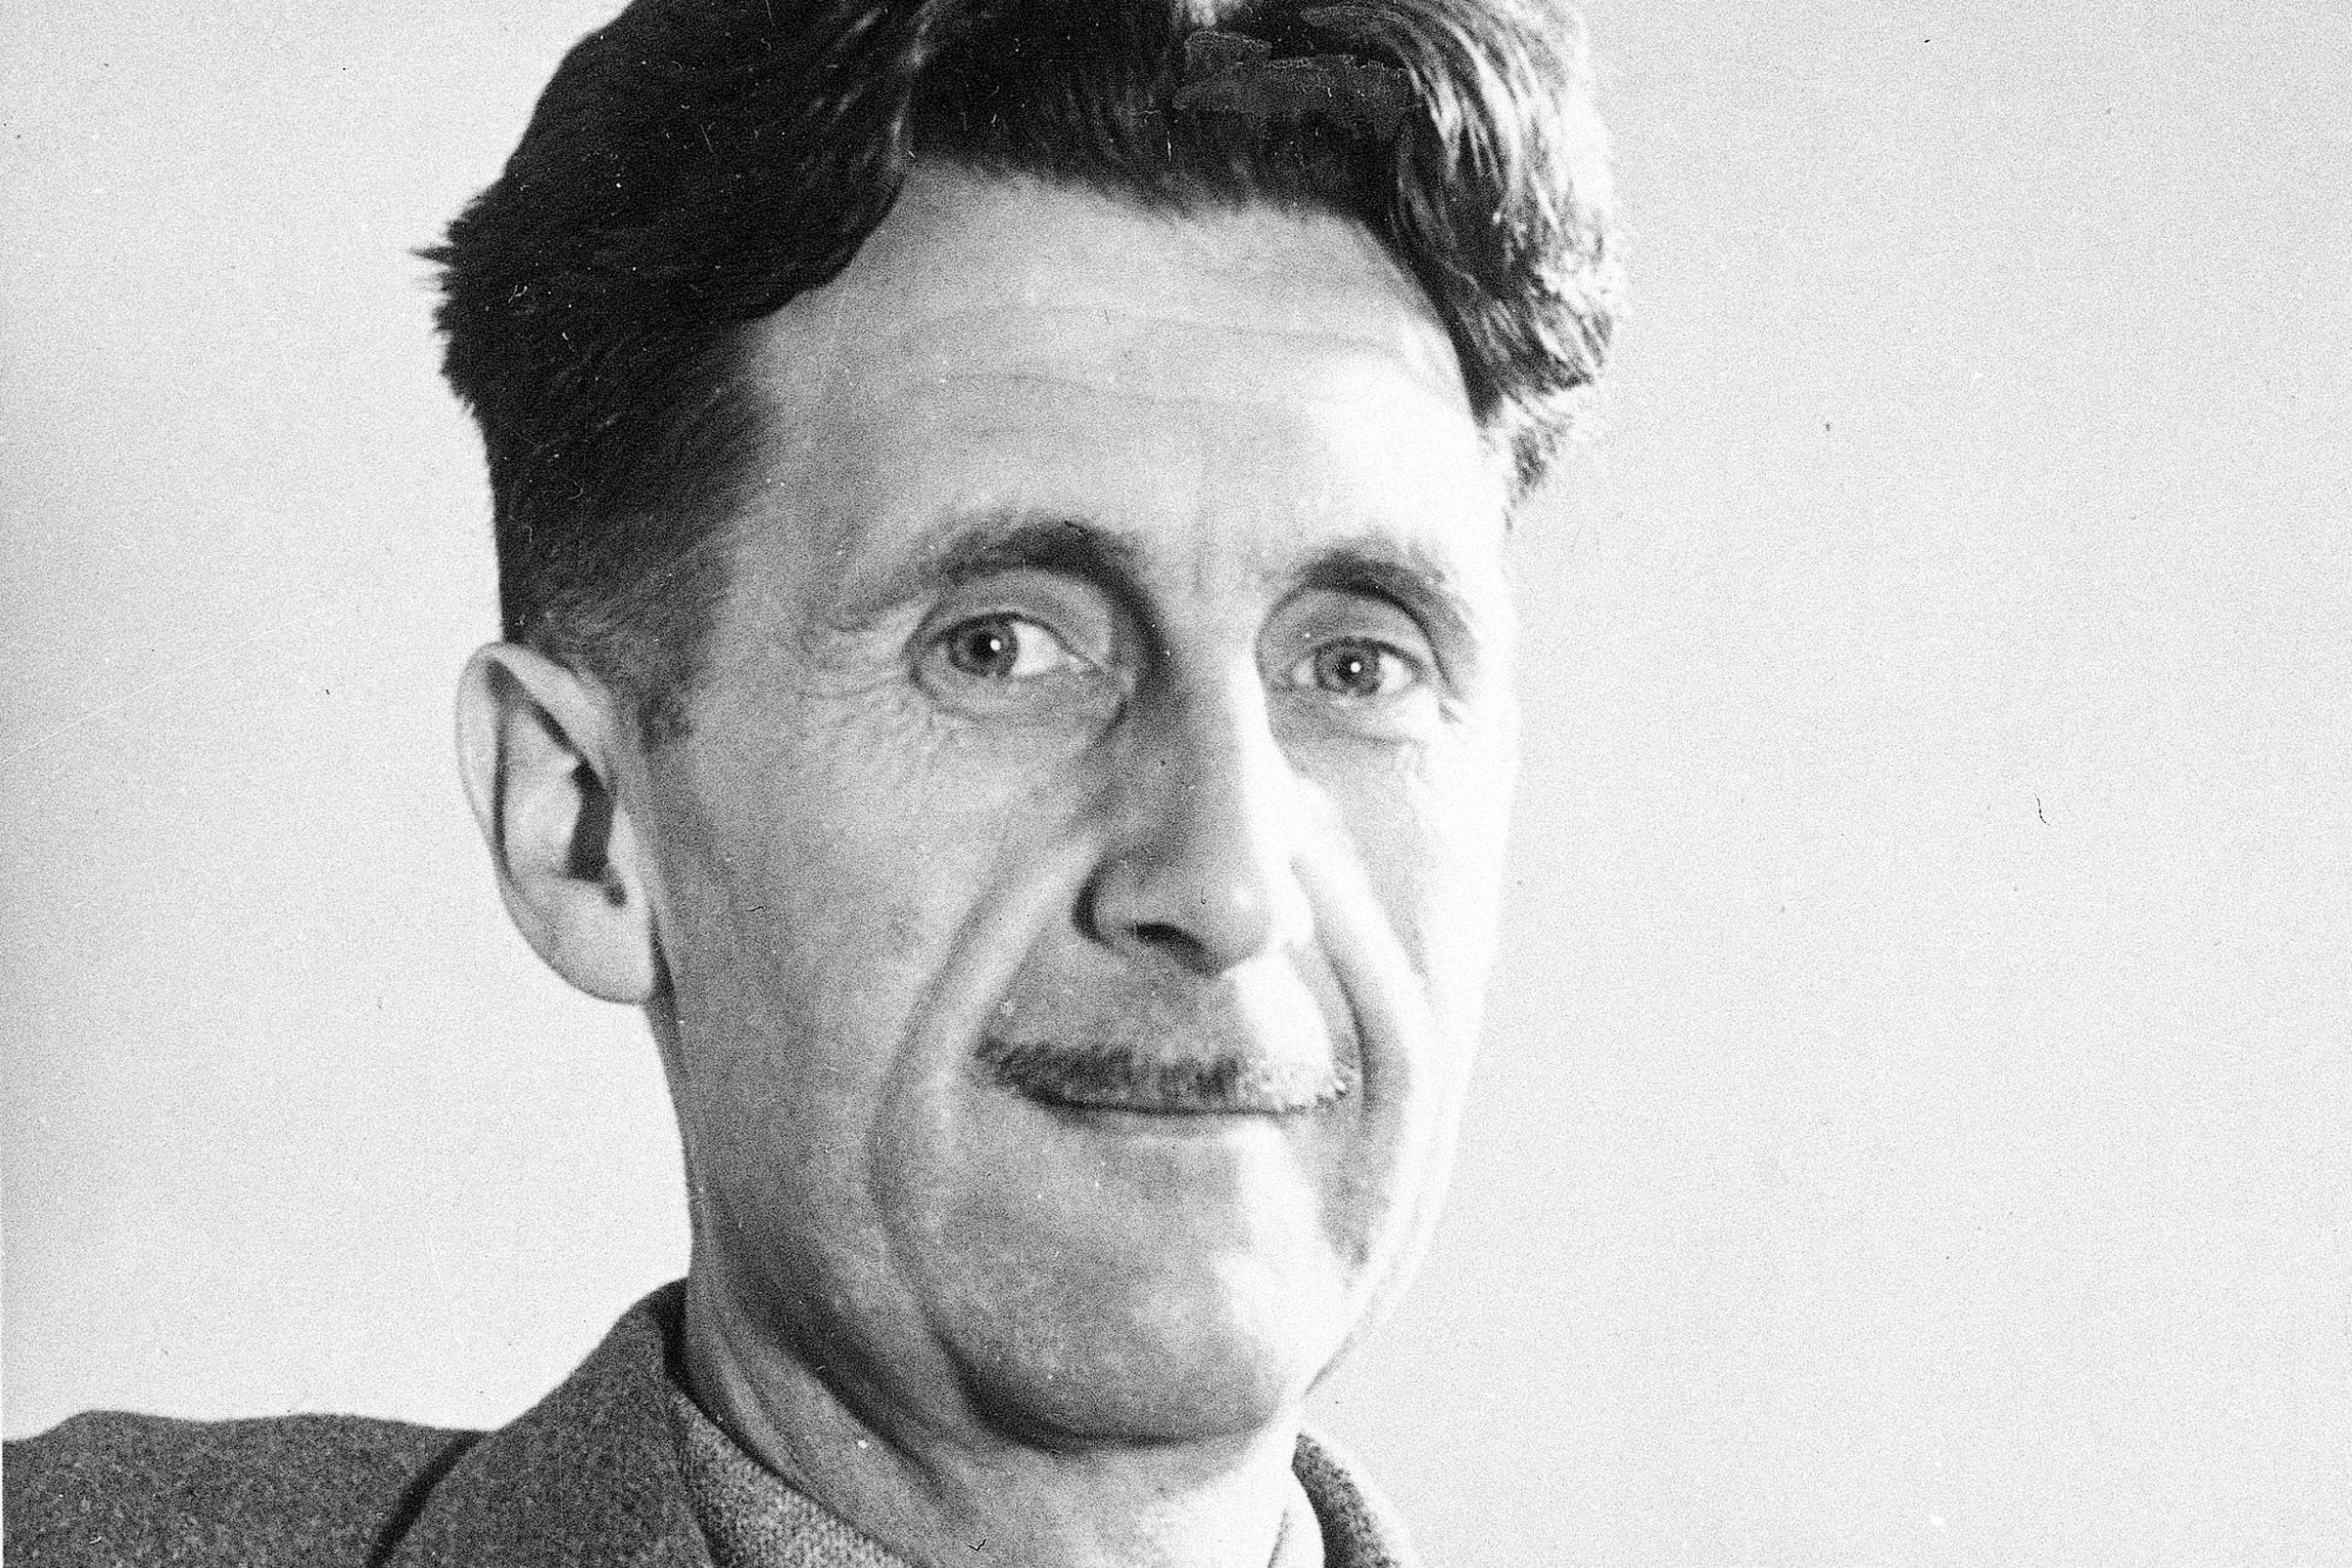 1984:George Orwell's Dystopian Masterpiece - CYCY Book Store